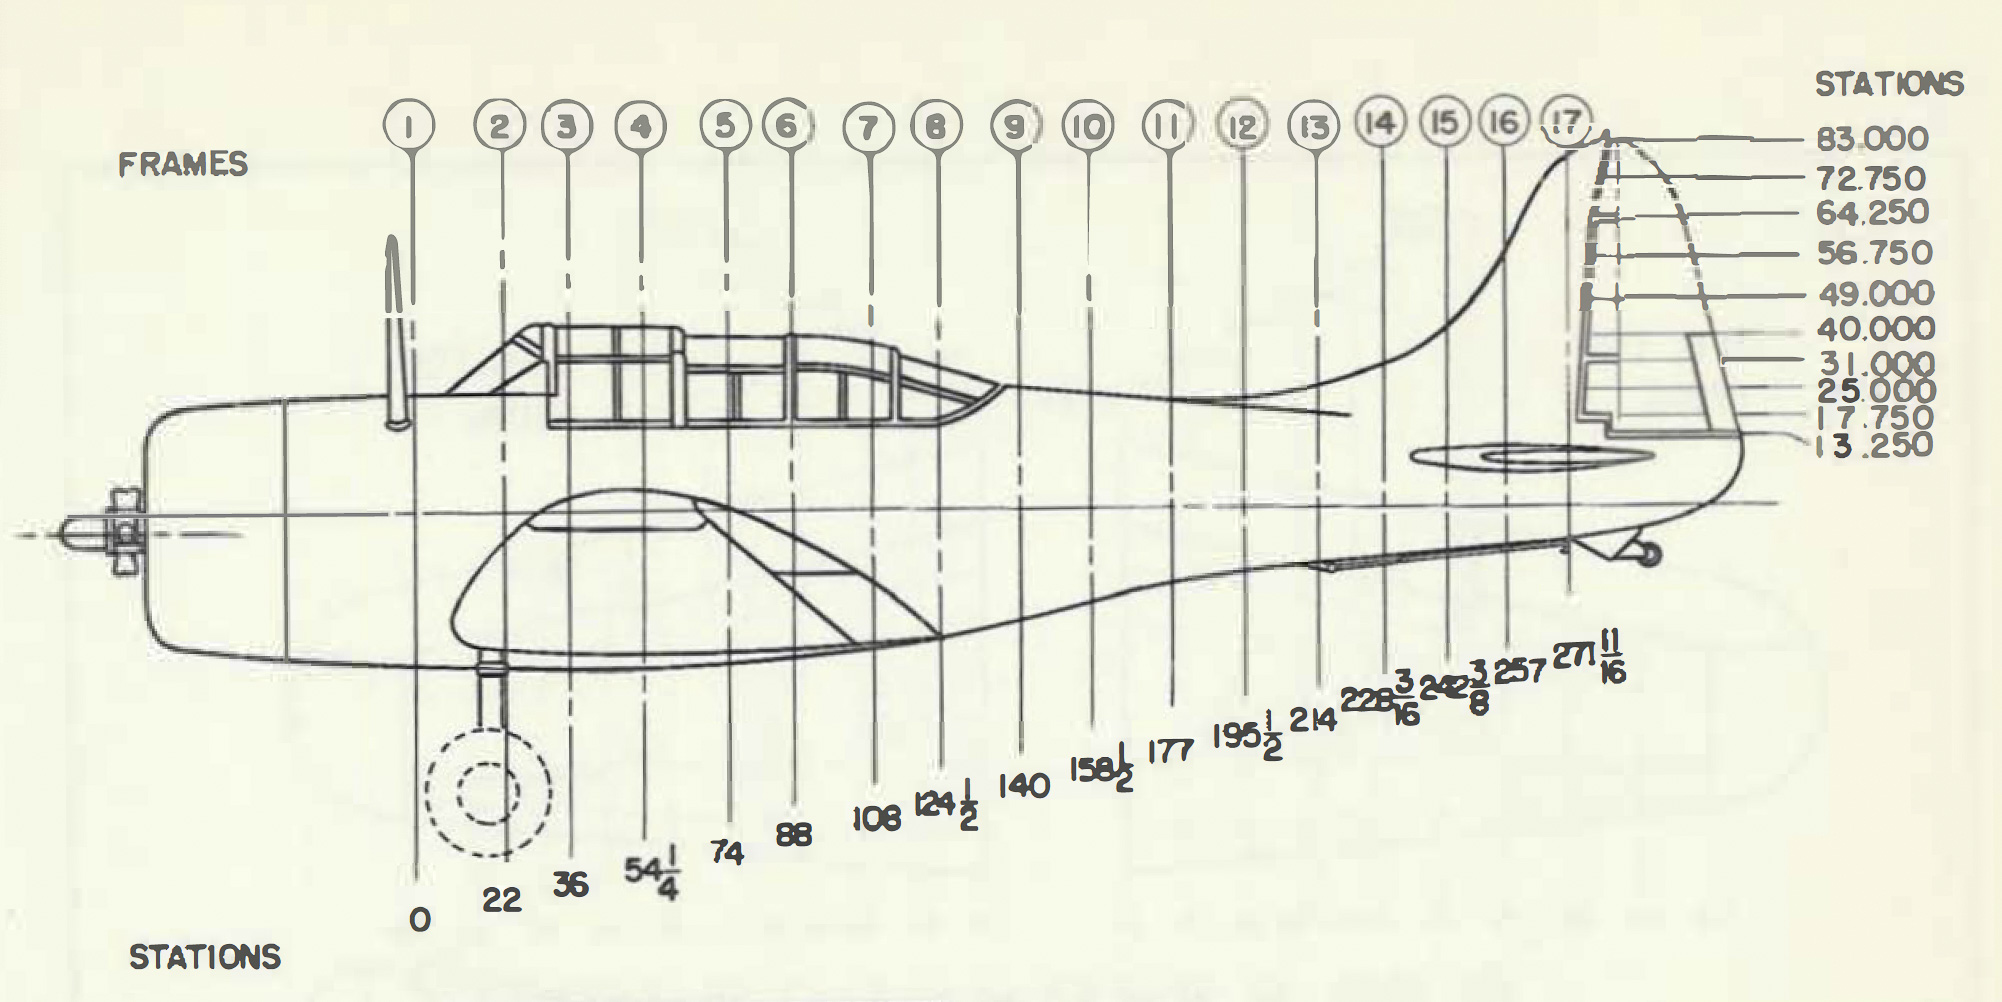 Sbd Diagram Delineating Fuselage Frame And Station Numbers P39 E&m Manual Small